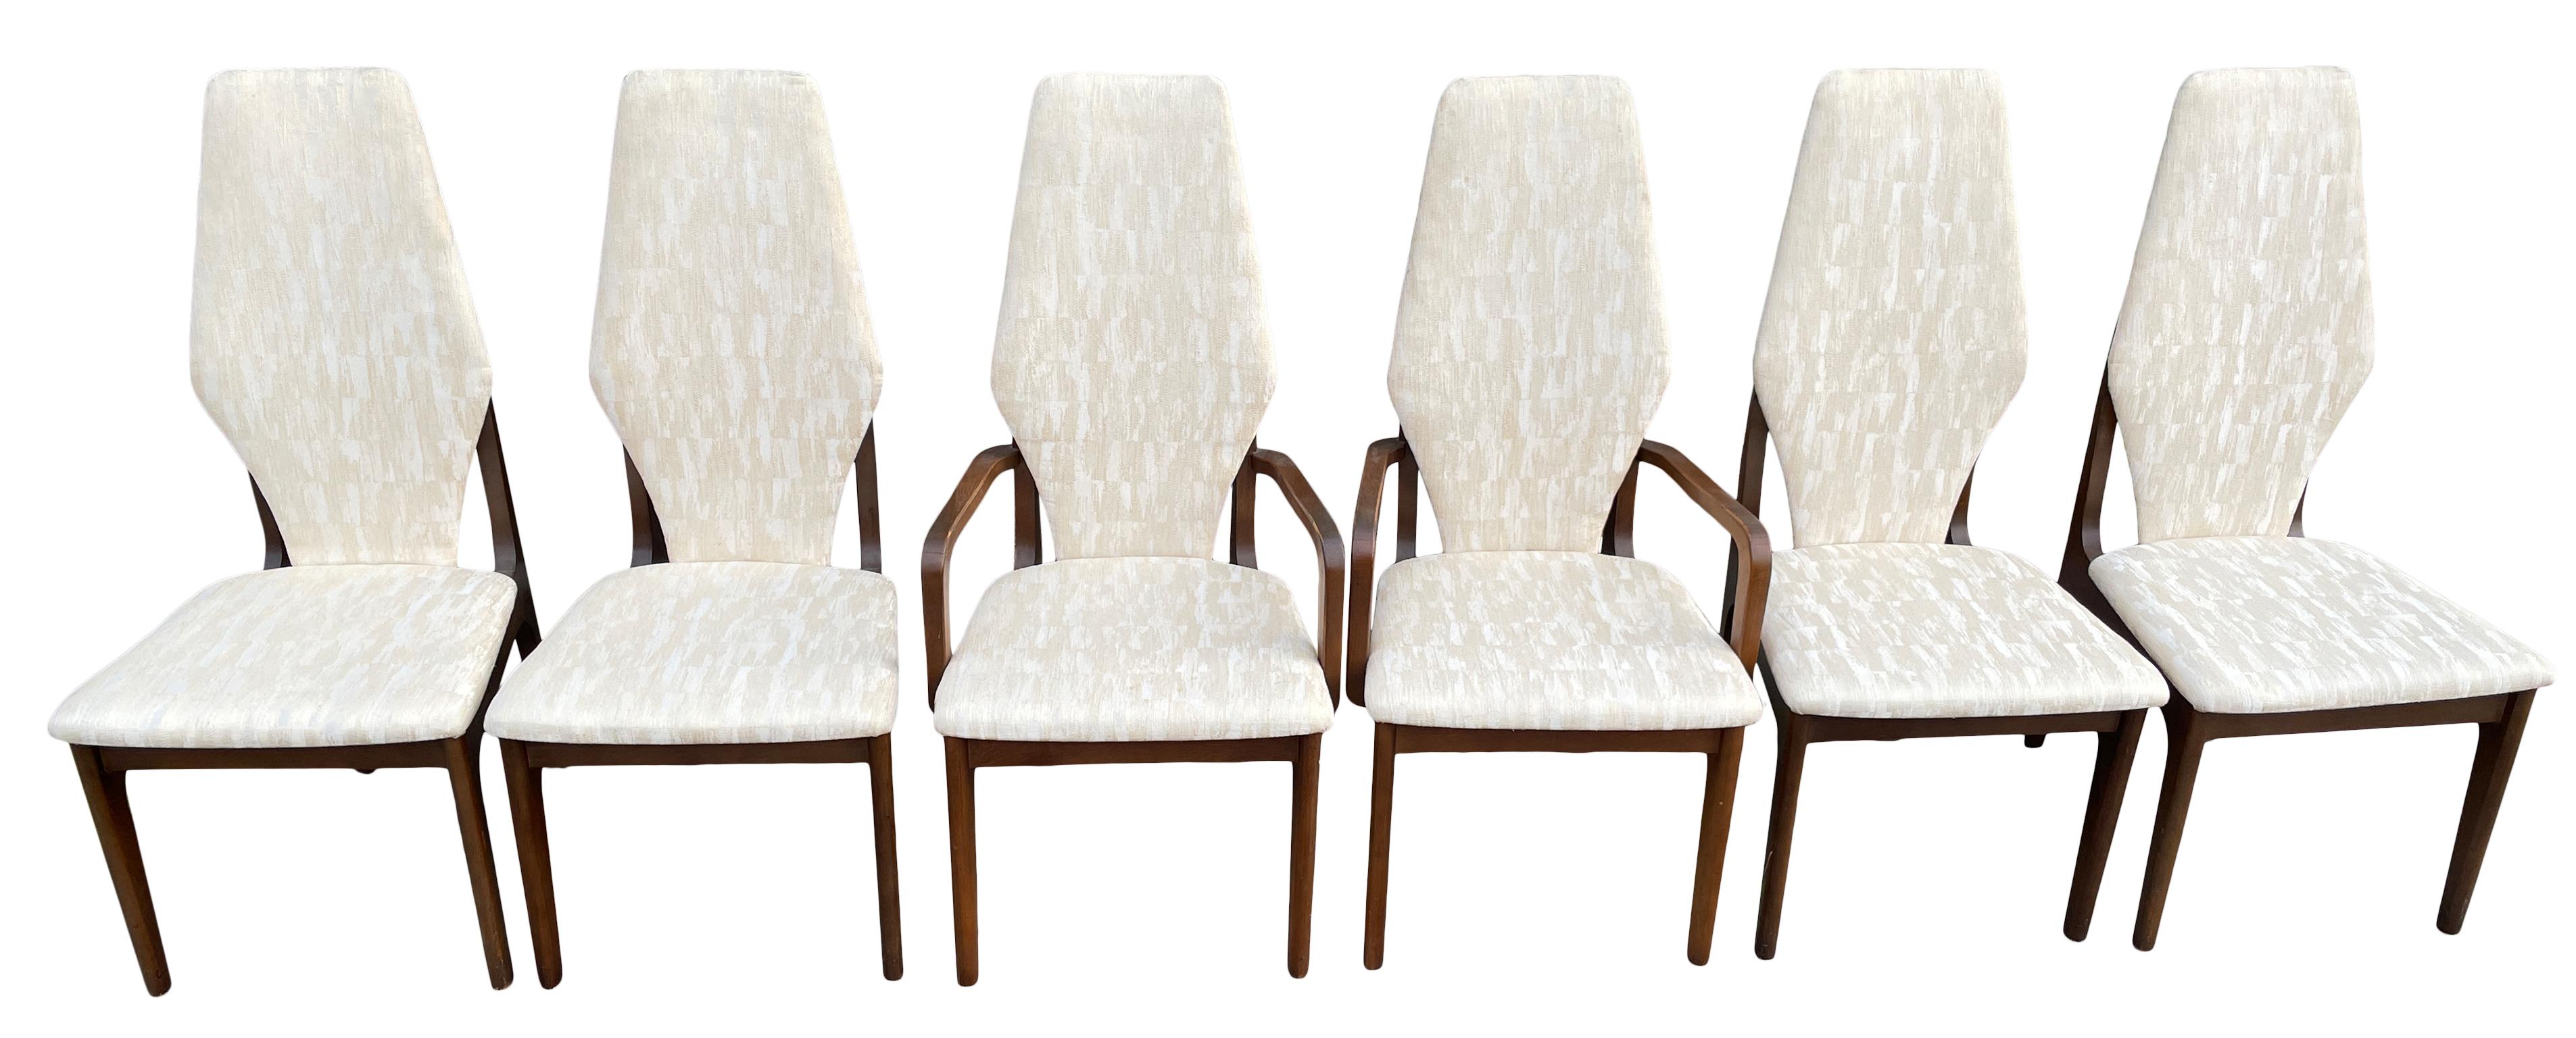 Set of 6 Mid-Century Modern walnut dining table high back chairs style of Adrian Pearsall - Good Vintage condition solid chairs - shows little signs of use and wear - off white textured upholstery in good shape or have them re-upholstered. Located